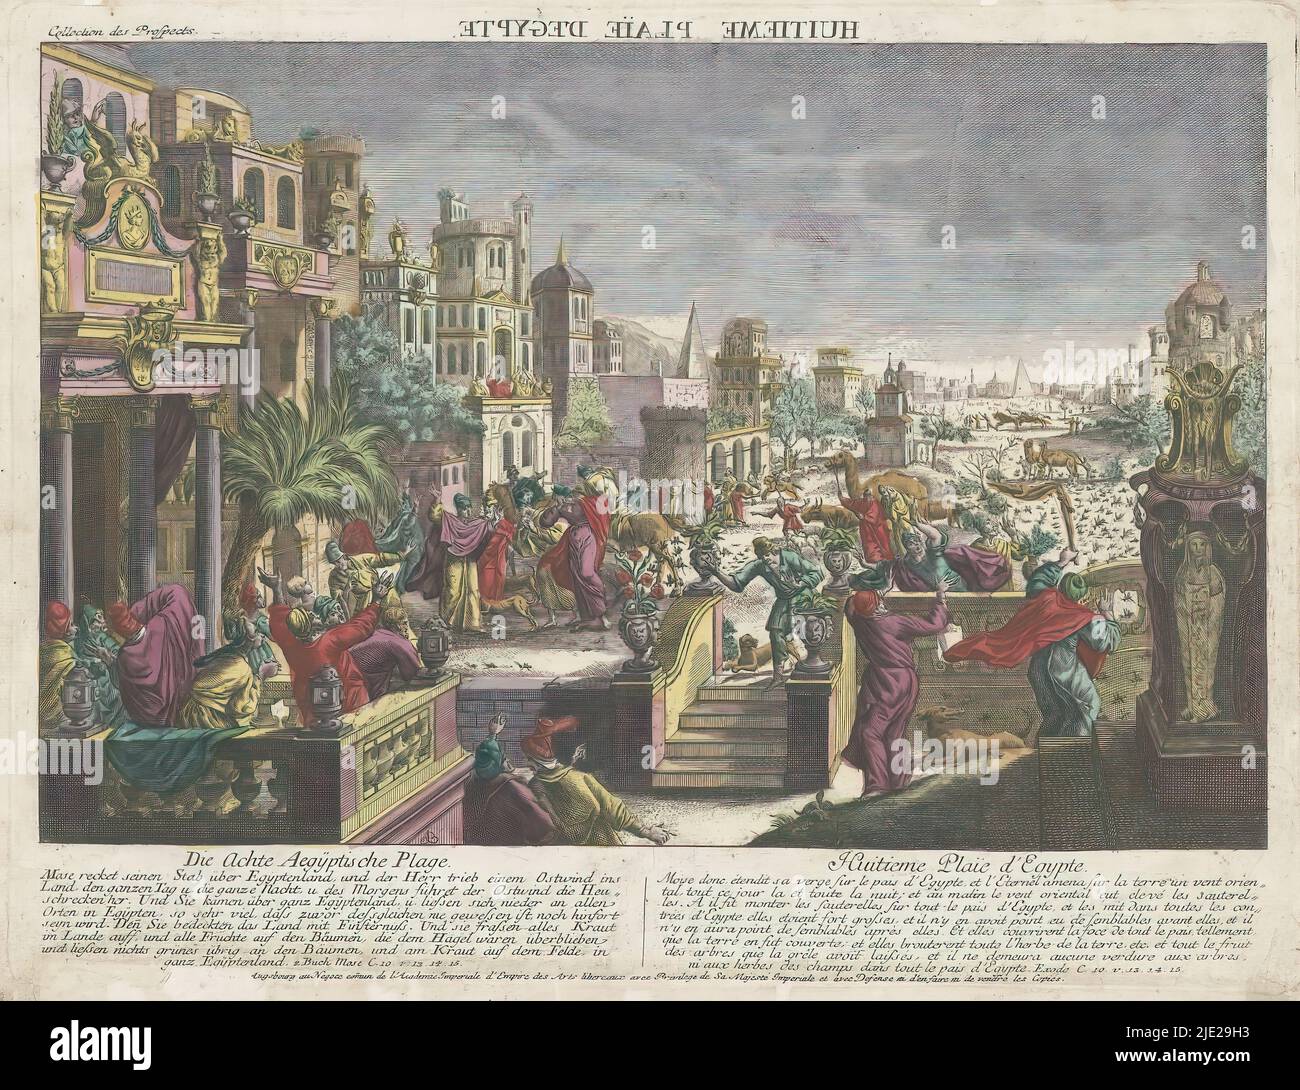 The Eighth Plague in Egypt, Die achte Aegyptische Plage (title on object), The Plague of the Locusts. View of a city under dark clouds, with railings and steps in the foreground. The people on the street are either beating around the bush or fleeing from the locusts that cover everything. Below the image explanations in German and French., publisher: Kaiserlich Franziskische Akademie, (mentioned on object), print maker: Monogrammist B (Duitsland), (mentioned on object), Jozef II (Duits keizer), (mentioned on object), publisher: Augsburg, print maker: Germany, 1755 - 1779, paper, etching, brush Stock Photo